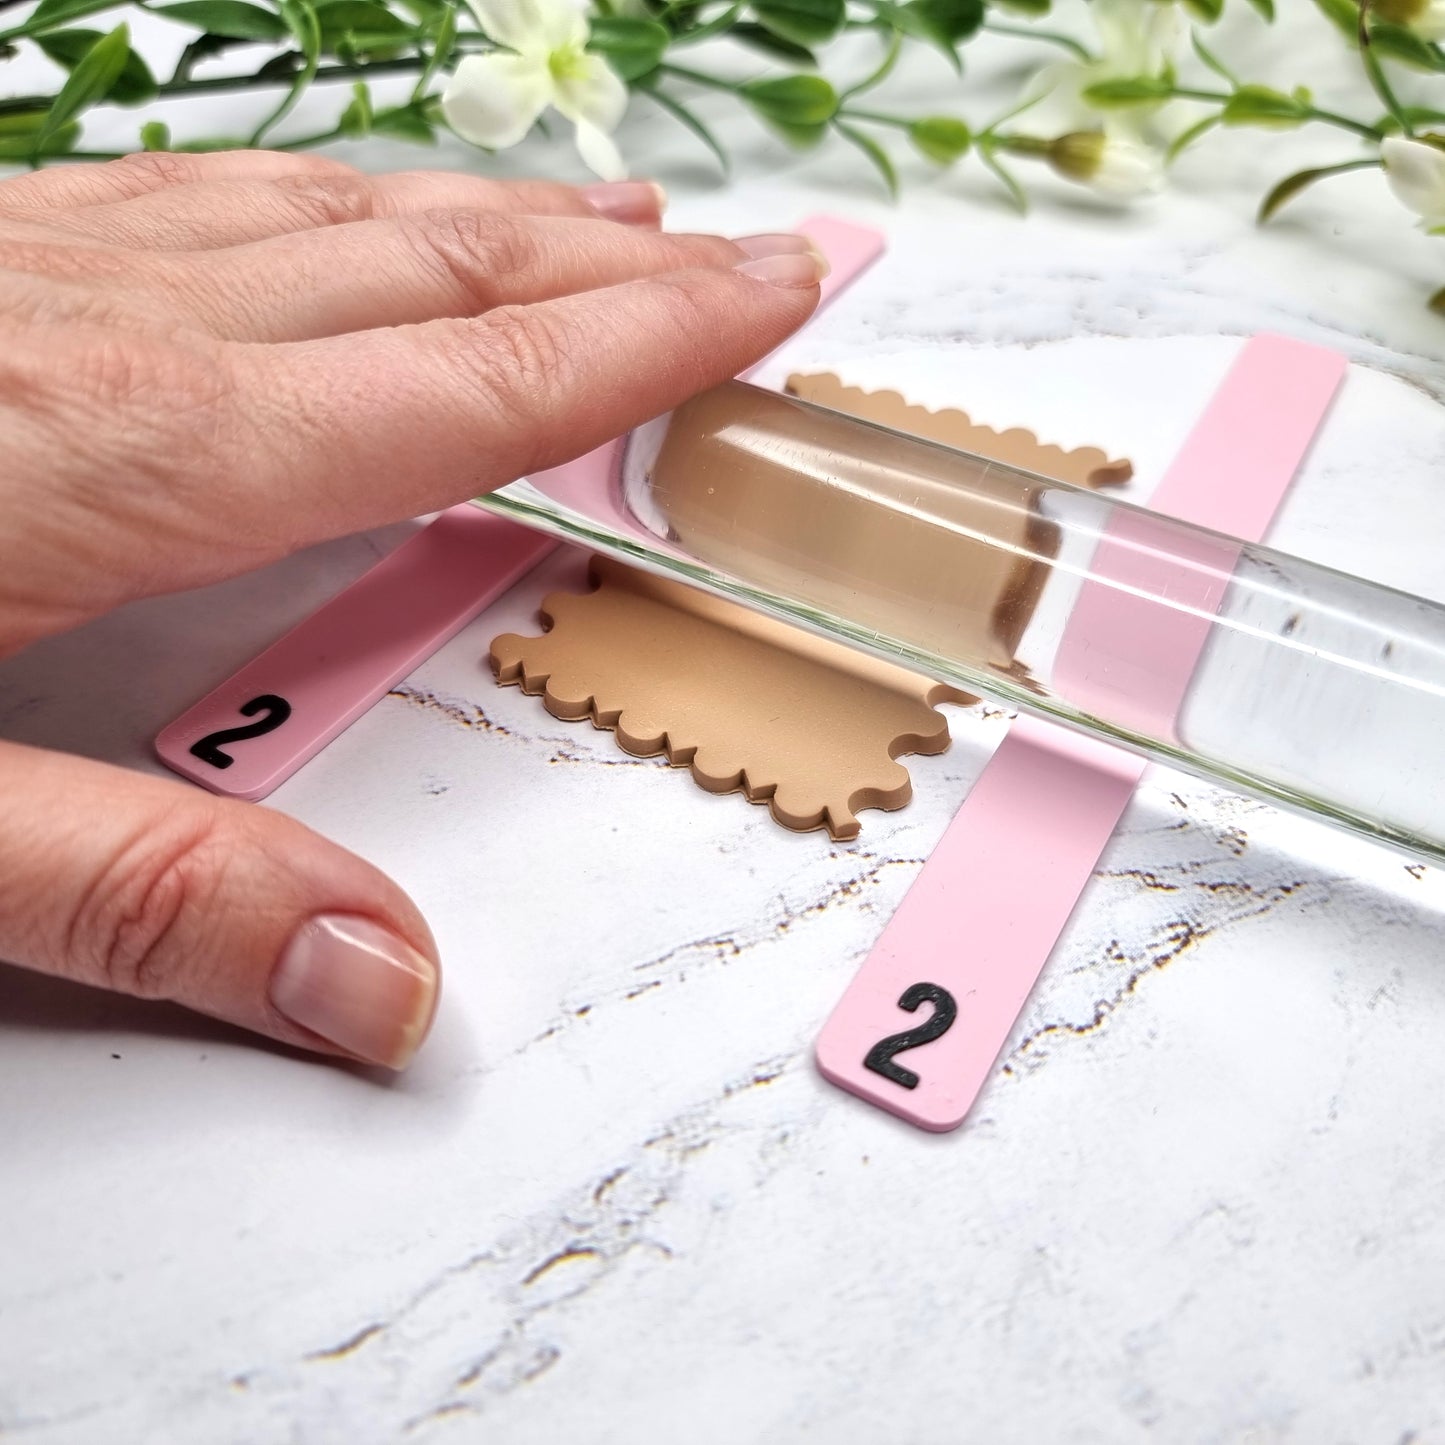 Clay Thickness Stick Rulers - Achieve Perfect, Uniform Clay Thickness Every Time  SweetyBijou   